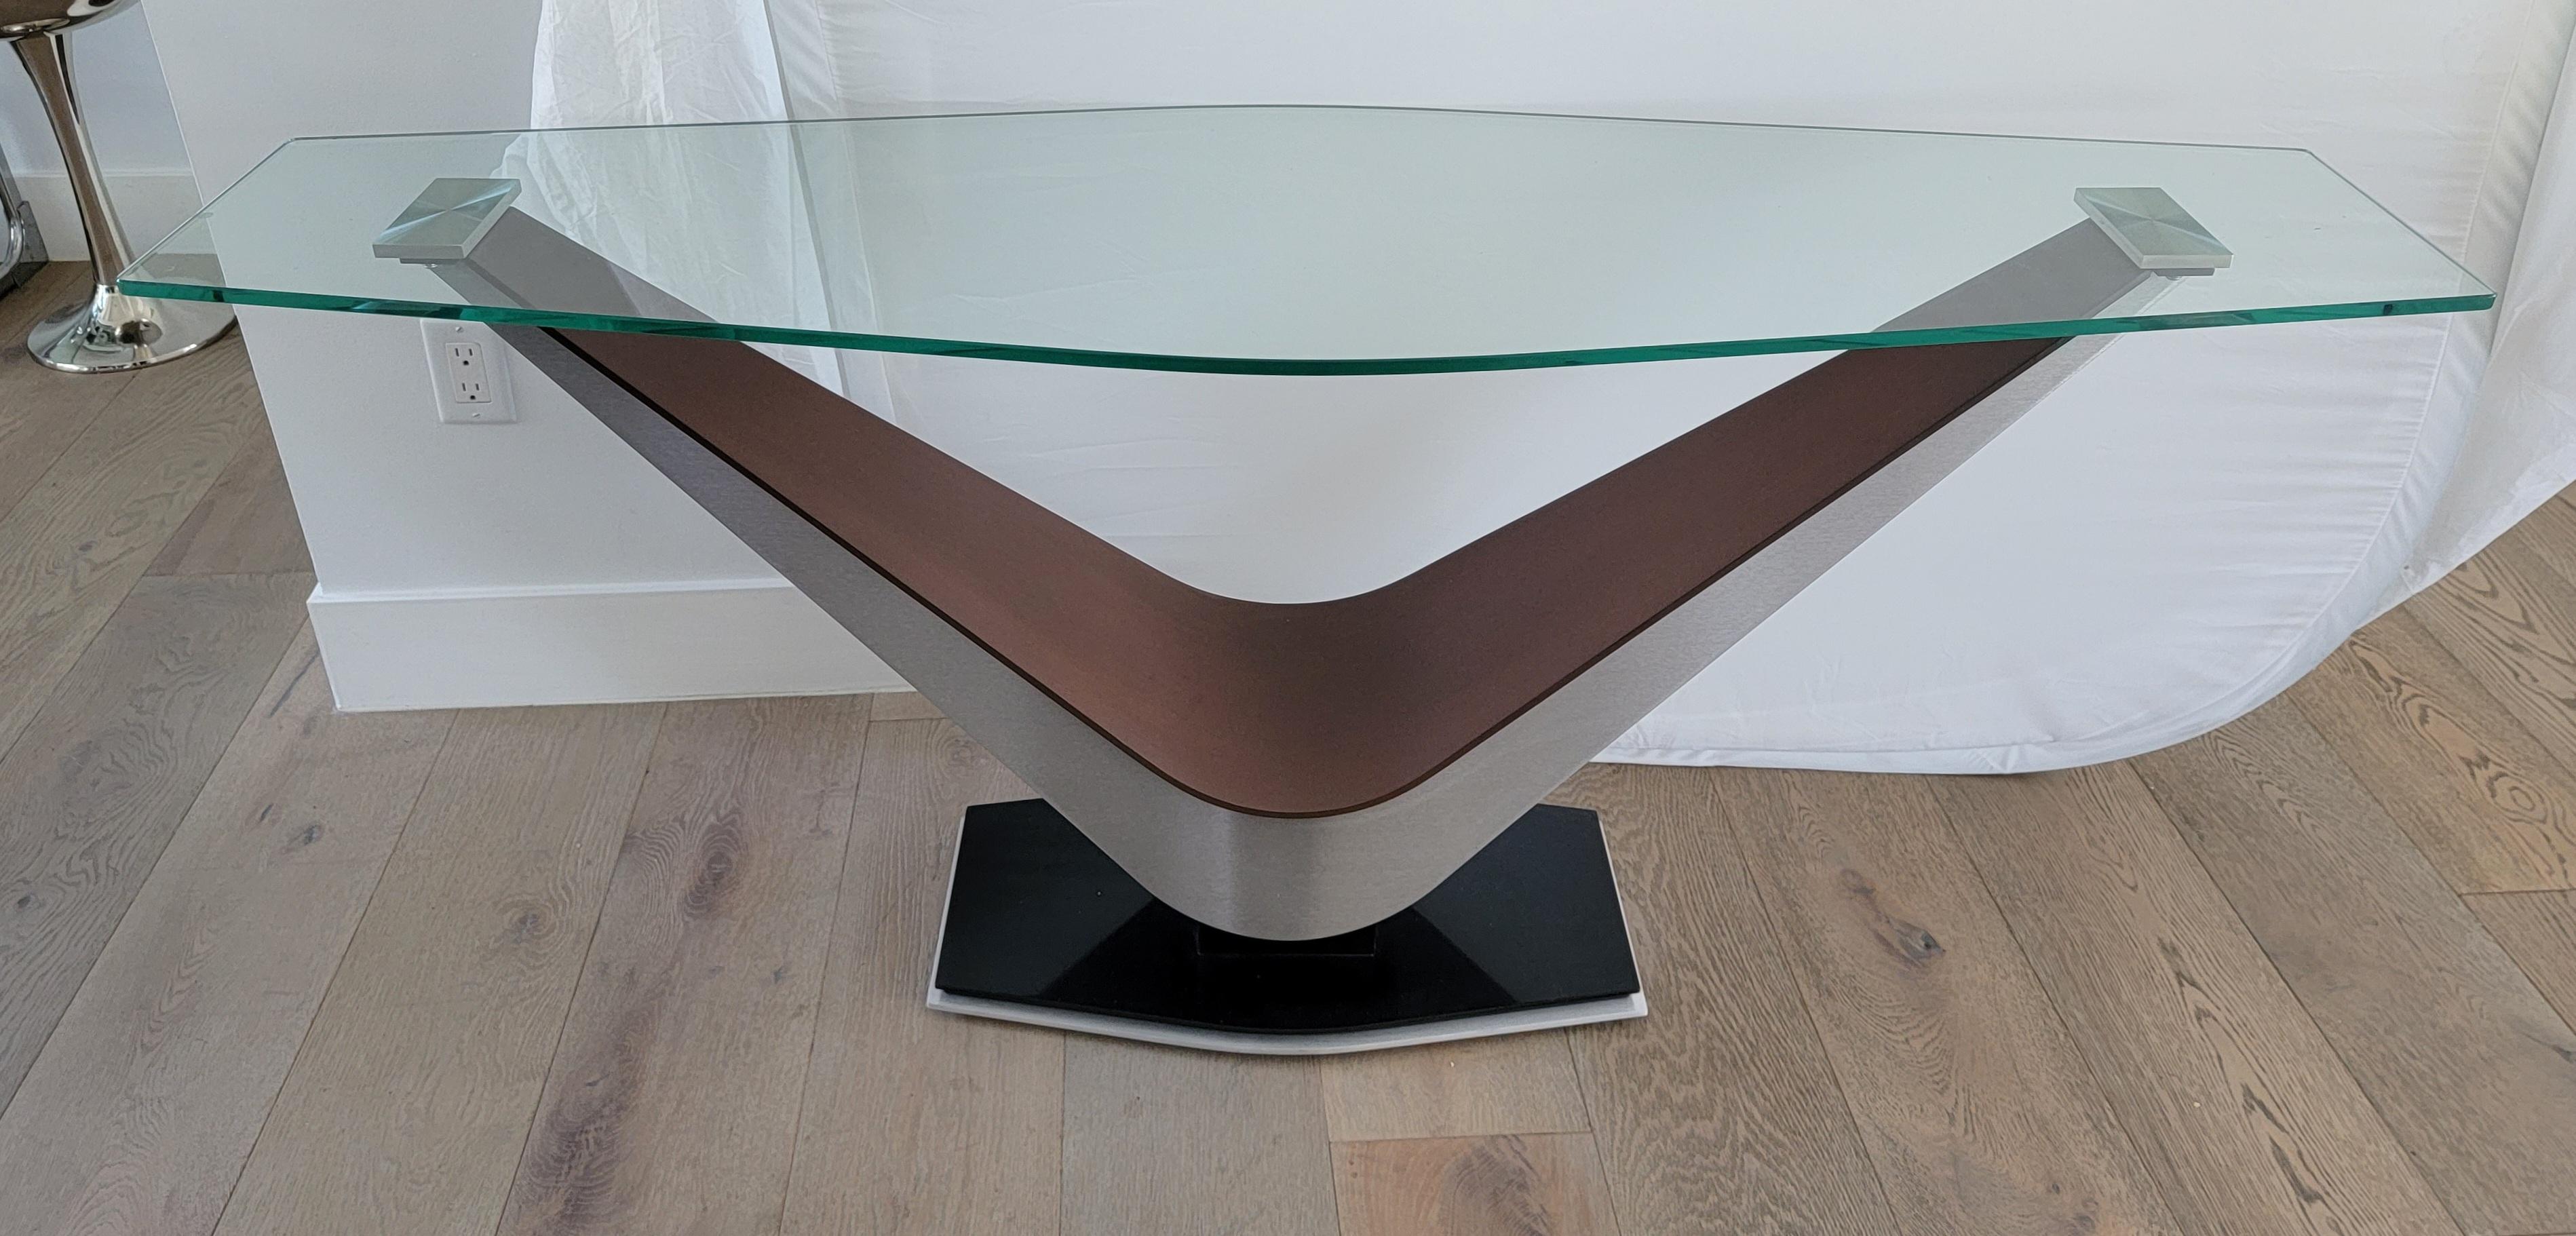 Large Contemporary modern console table with thick glass and a chrome and wooden frame. The chrome block accents hold up the glass and are visible through the top of the table. Very strong and sturdy piece.